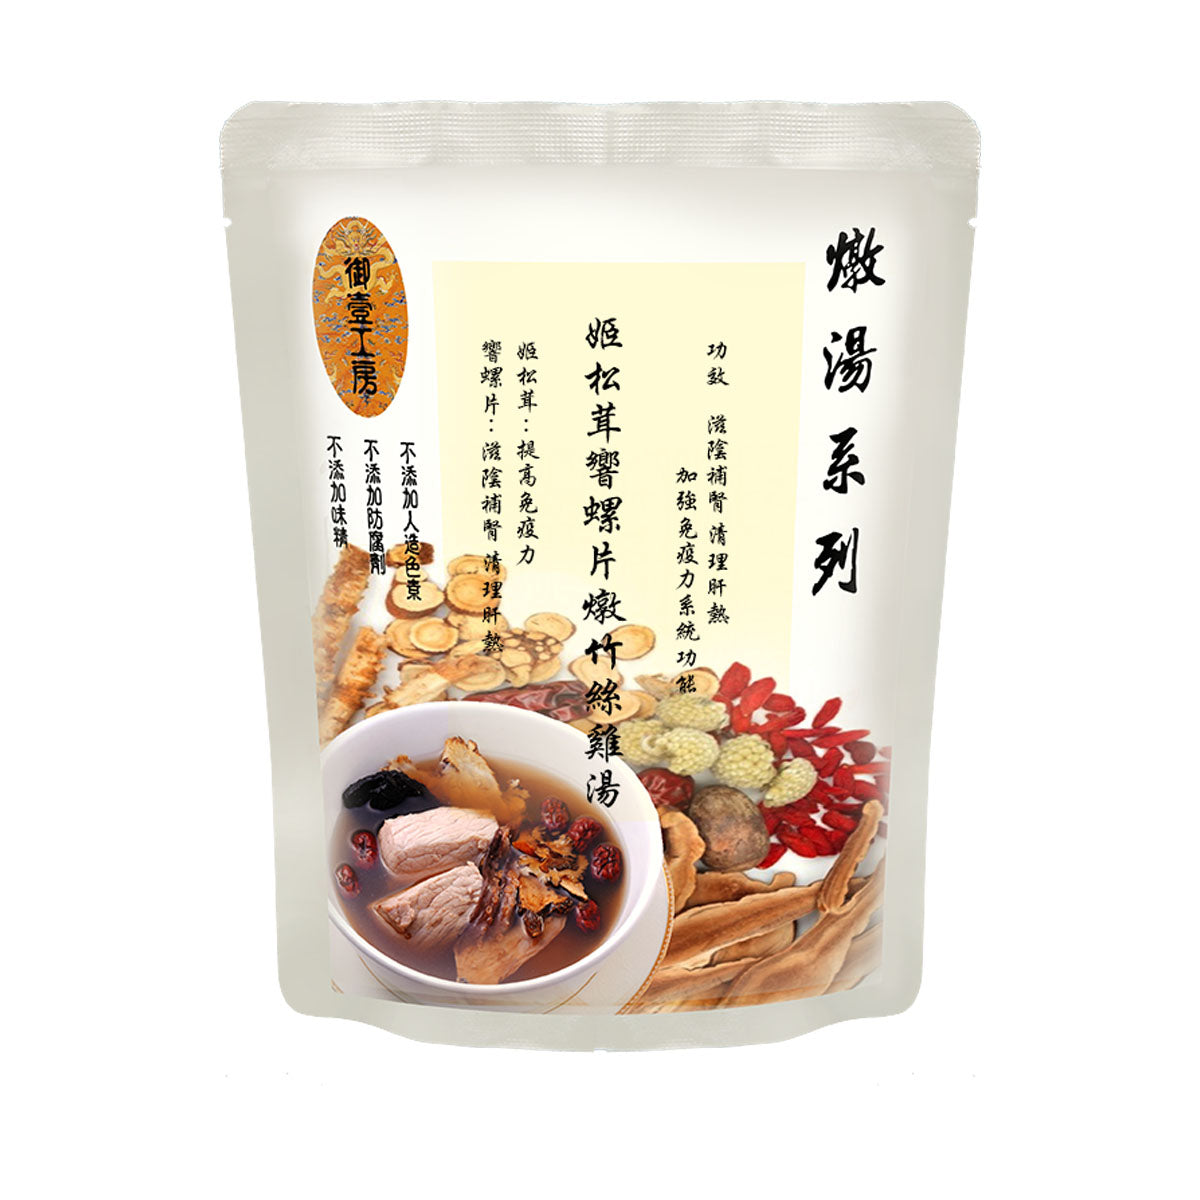 MAMA730 御壹工房 姬松茸響螺片燉竹絲雞湯 Yoyo Kitchen Chicken Soup with Agaricus Subrufescens and Conch meat